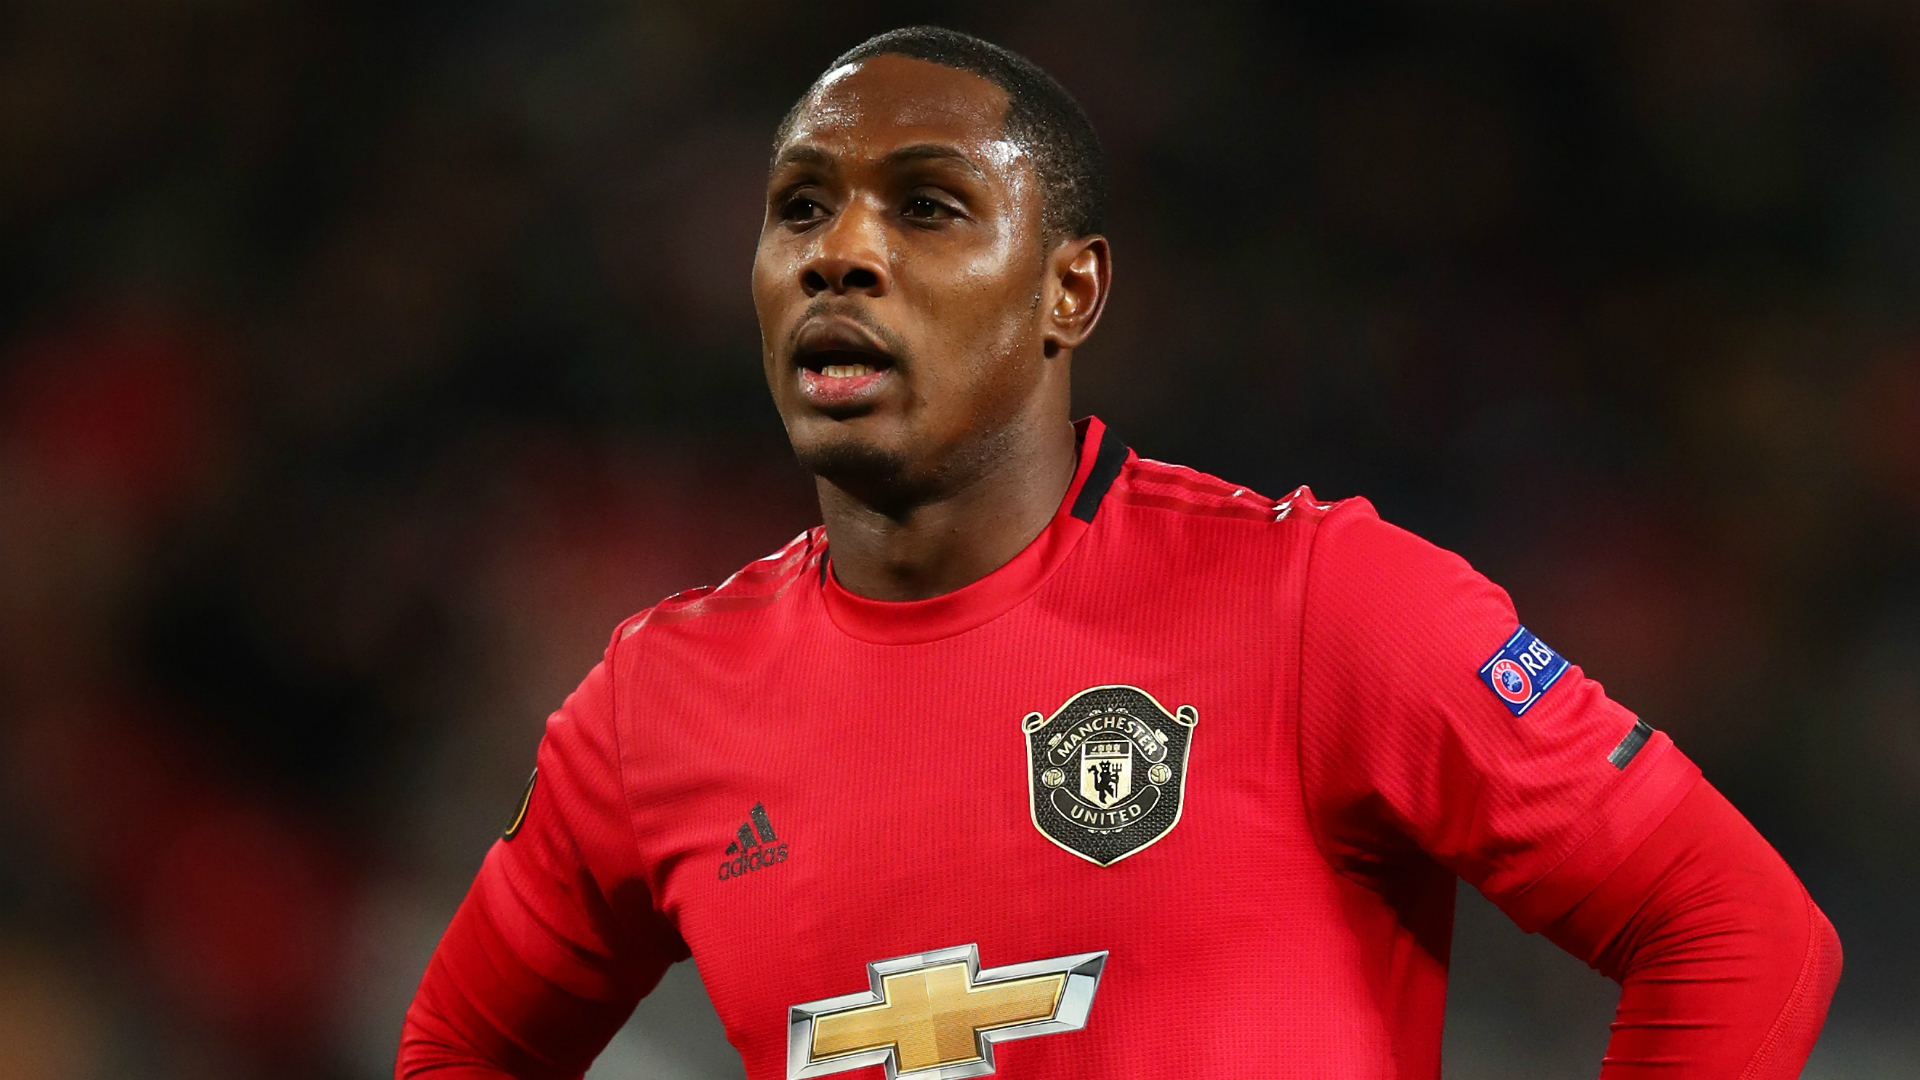 Having scored his first goal for his boyhood club, Odion Ighalo has vowed to help Manchester United into a brighter future.